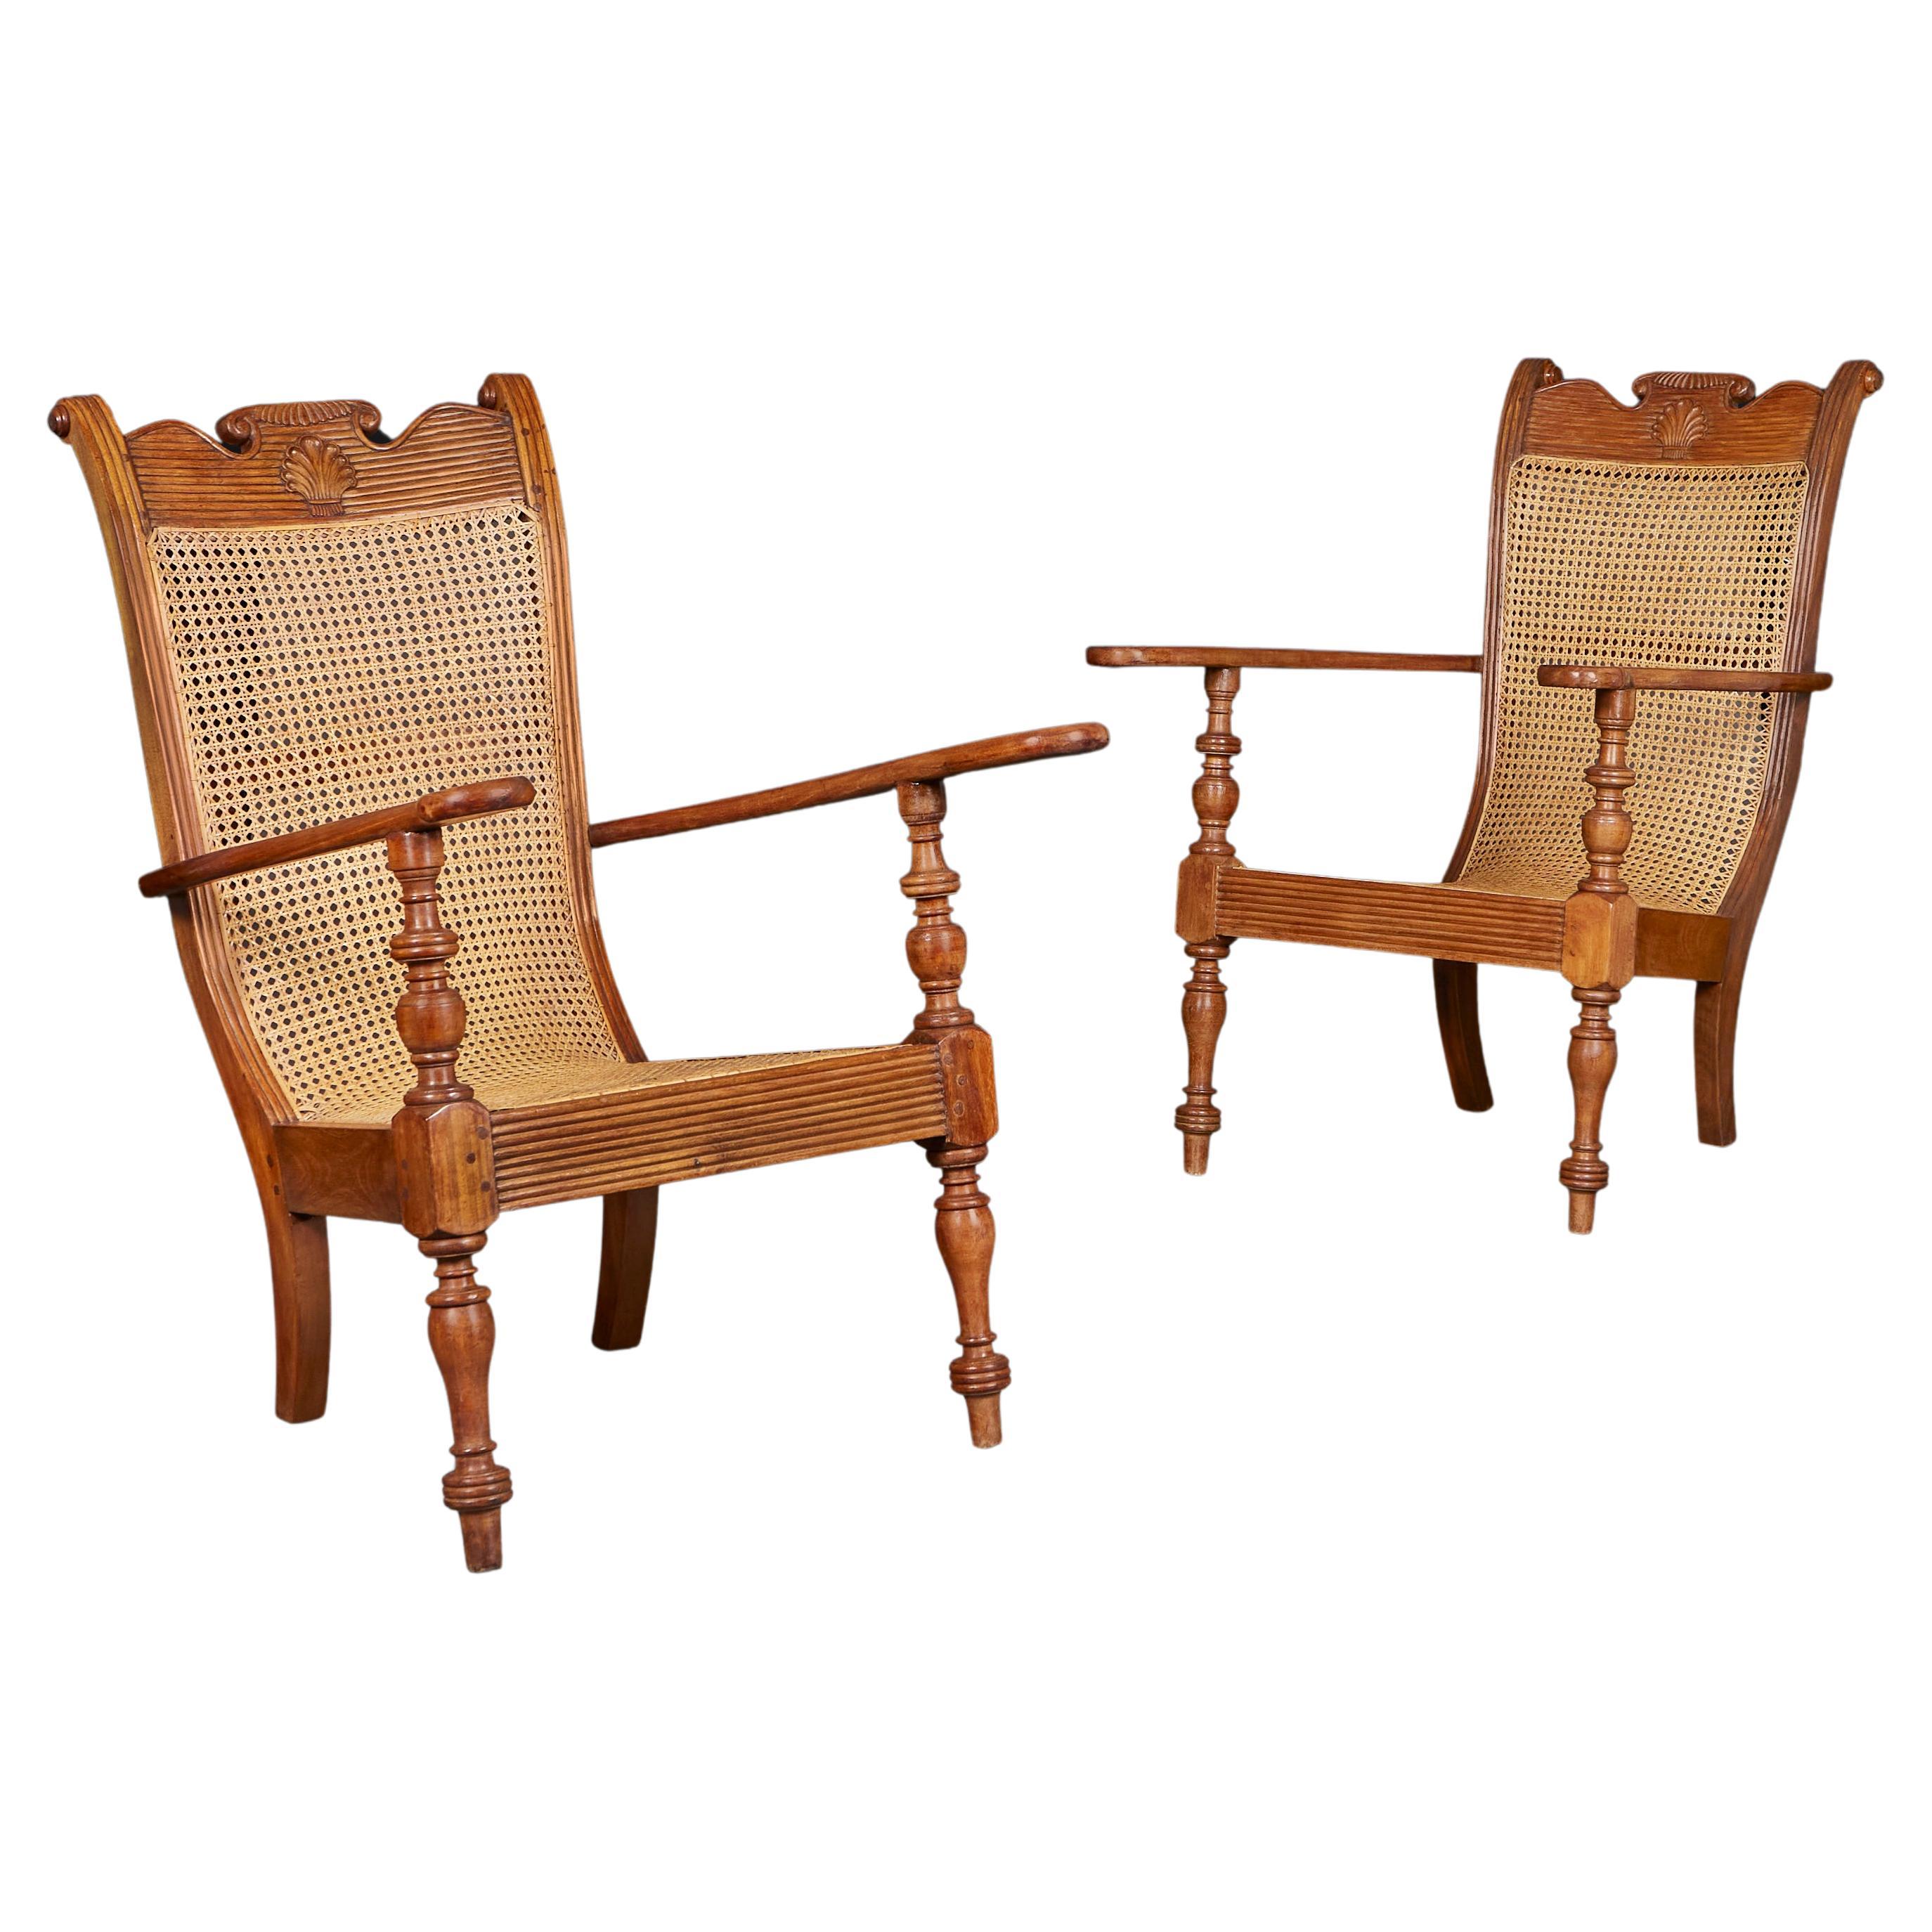 A Pair of Sri Lankan Teak and Cane Planters Chairs 